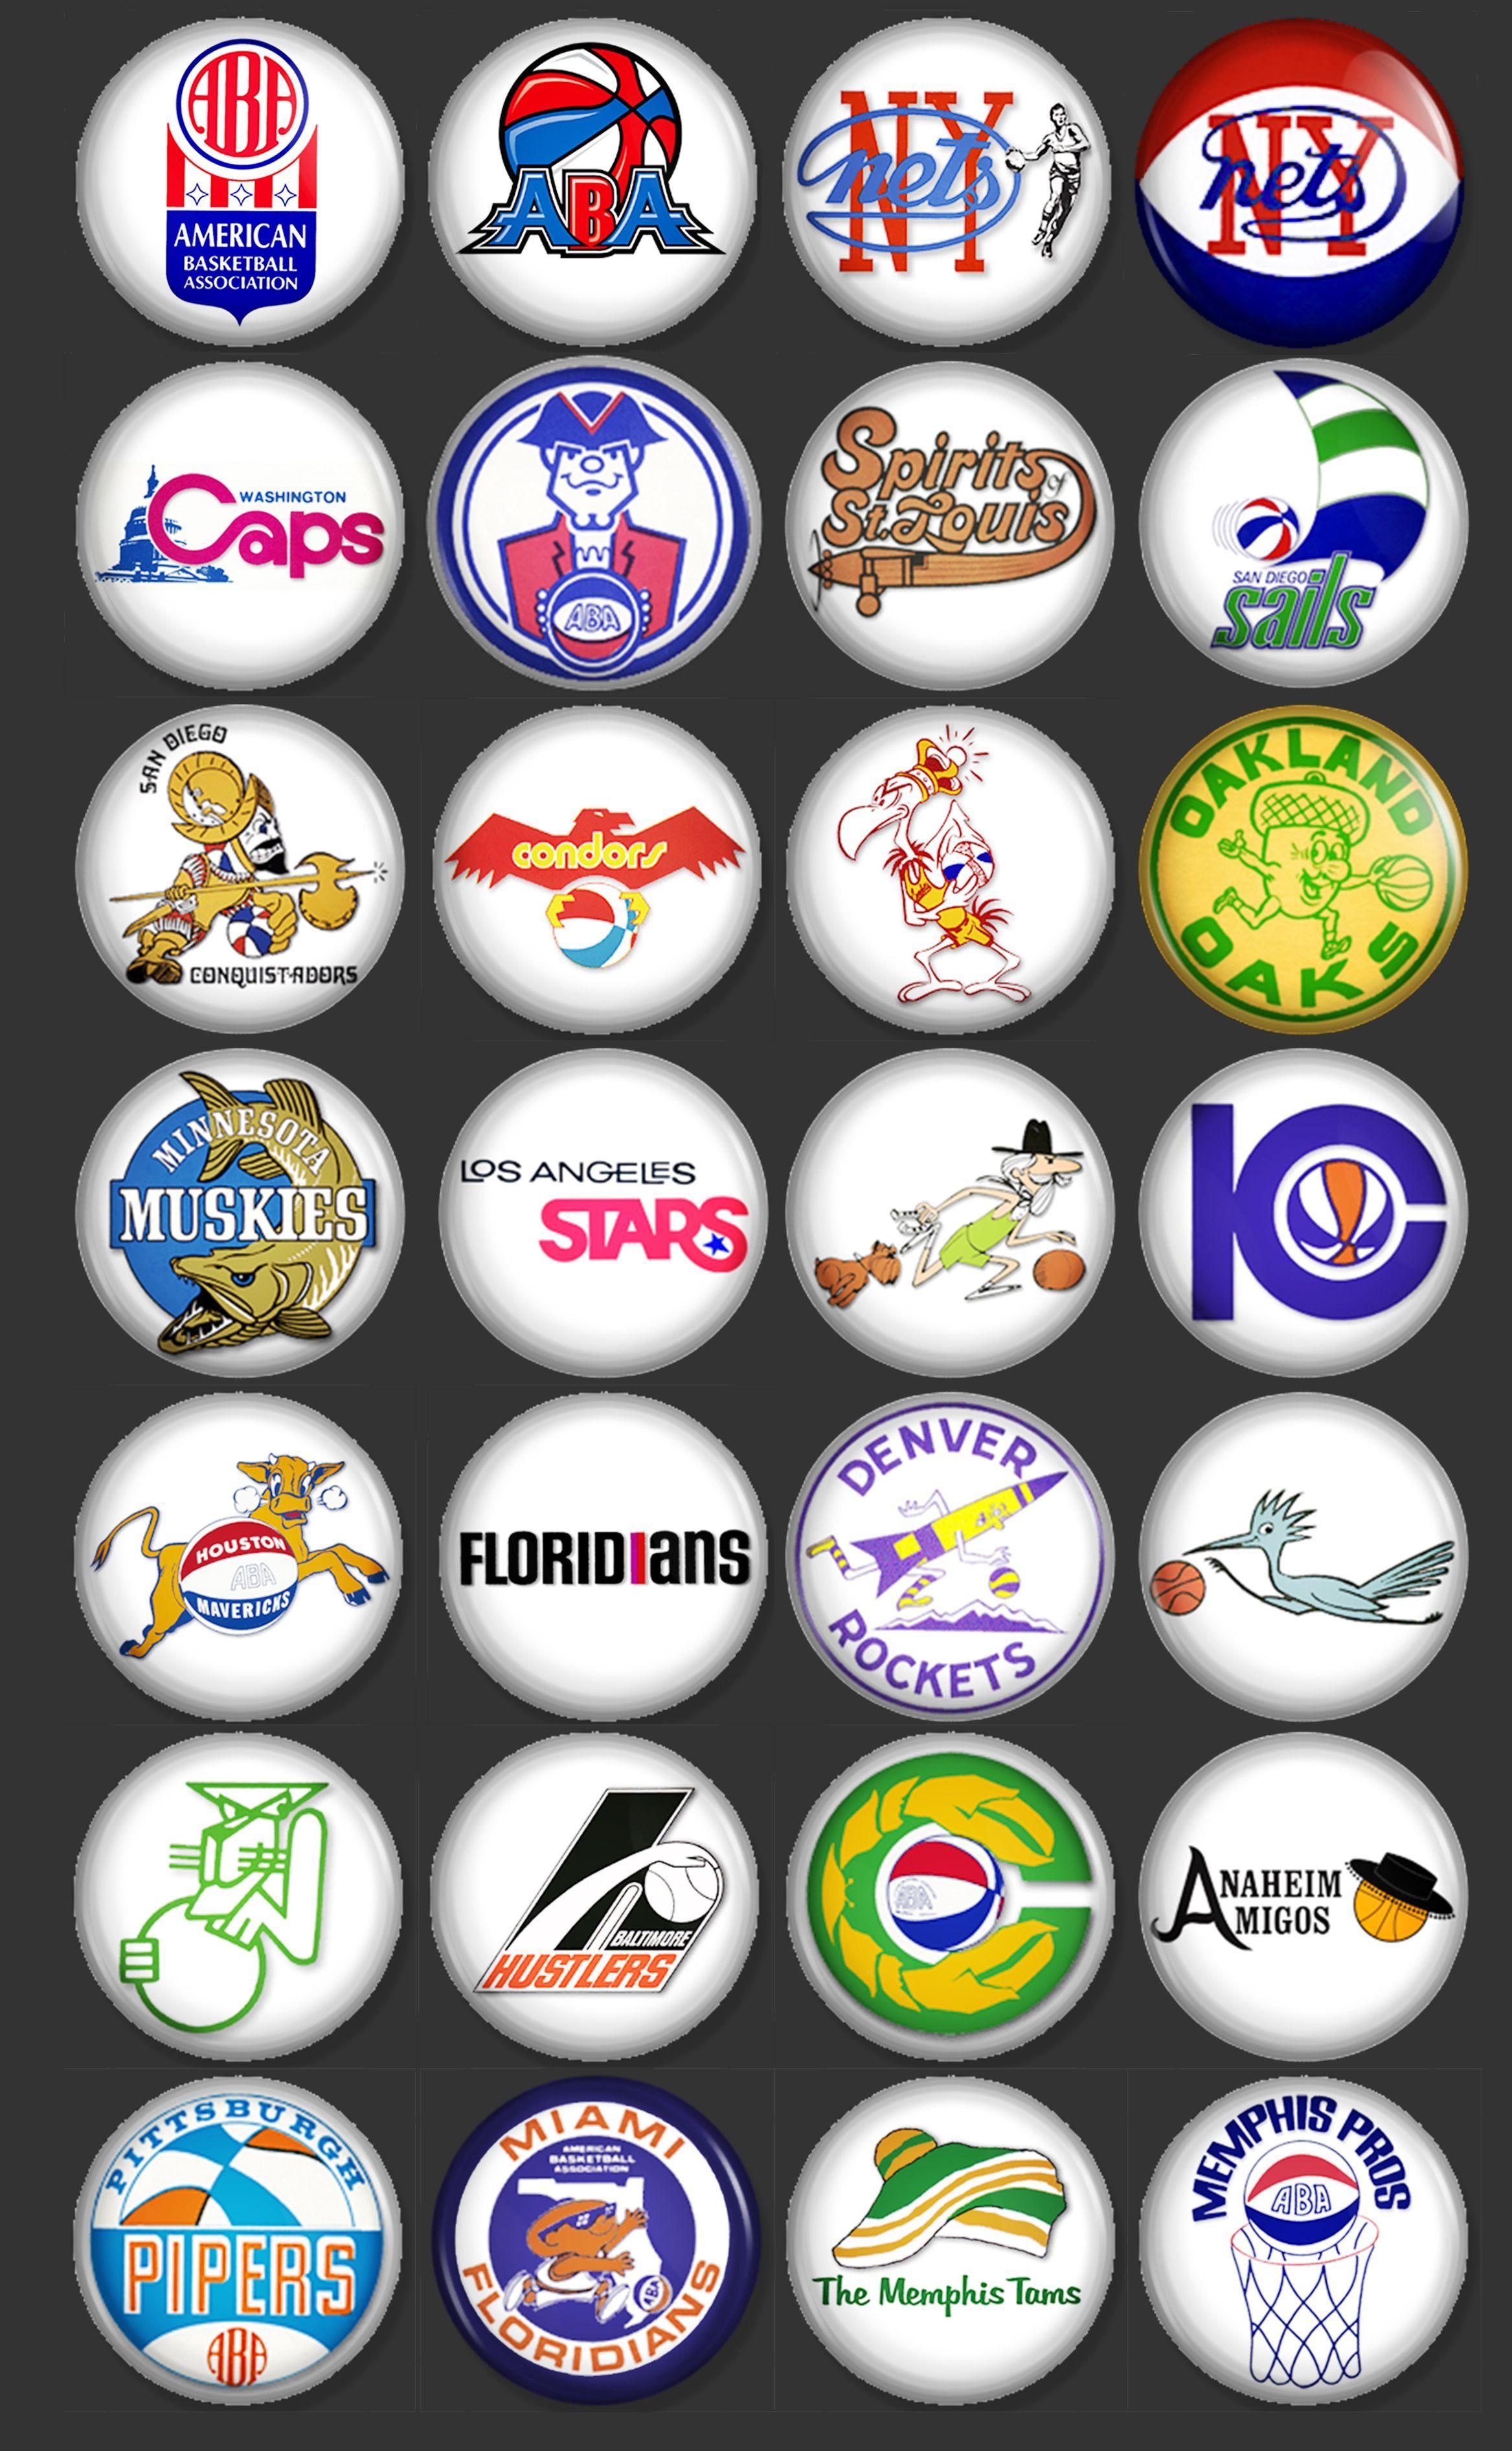 ABA Team Logo - THIS IS A SET OF 28 VINTAGE ABA BASKETBALL TEAM LOGOS. YOU ARE ...